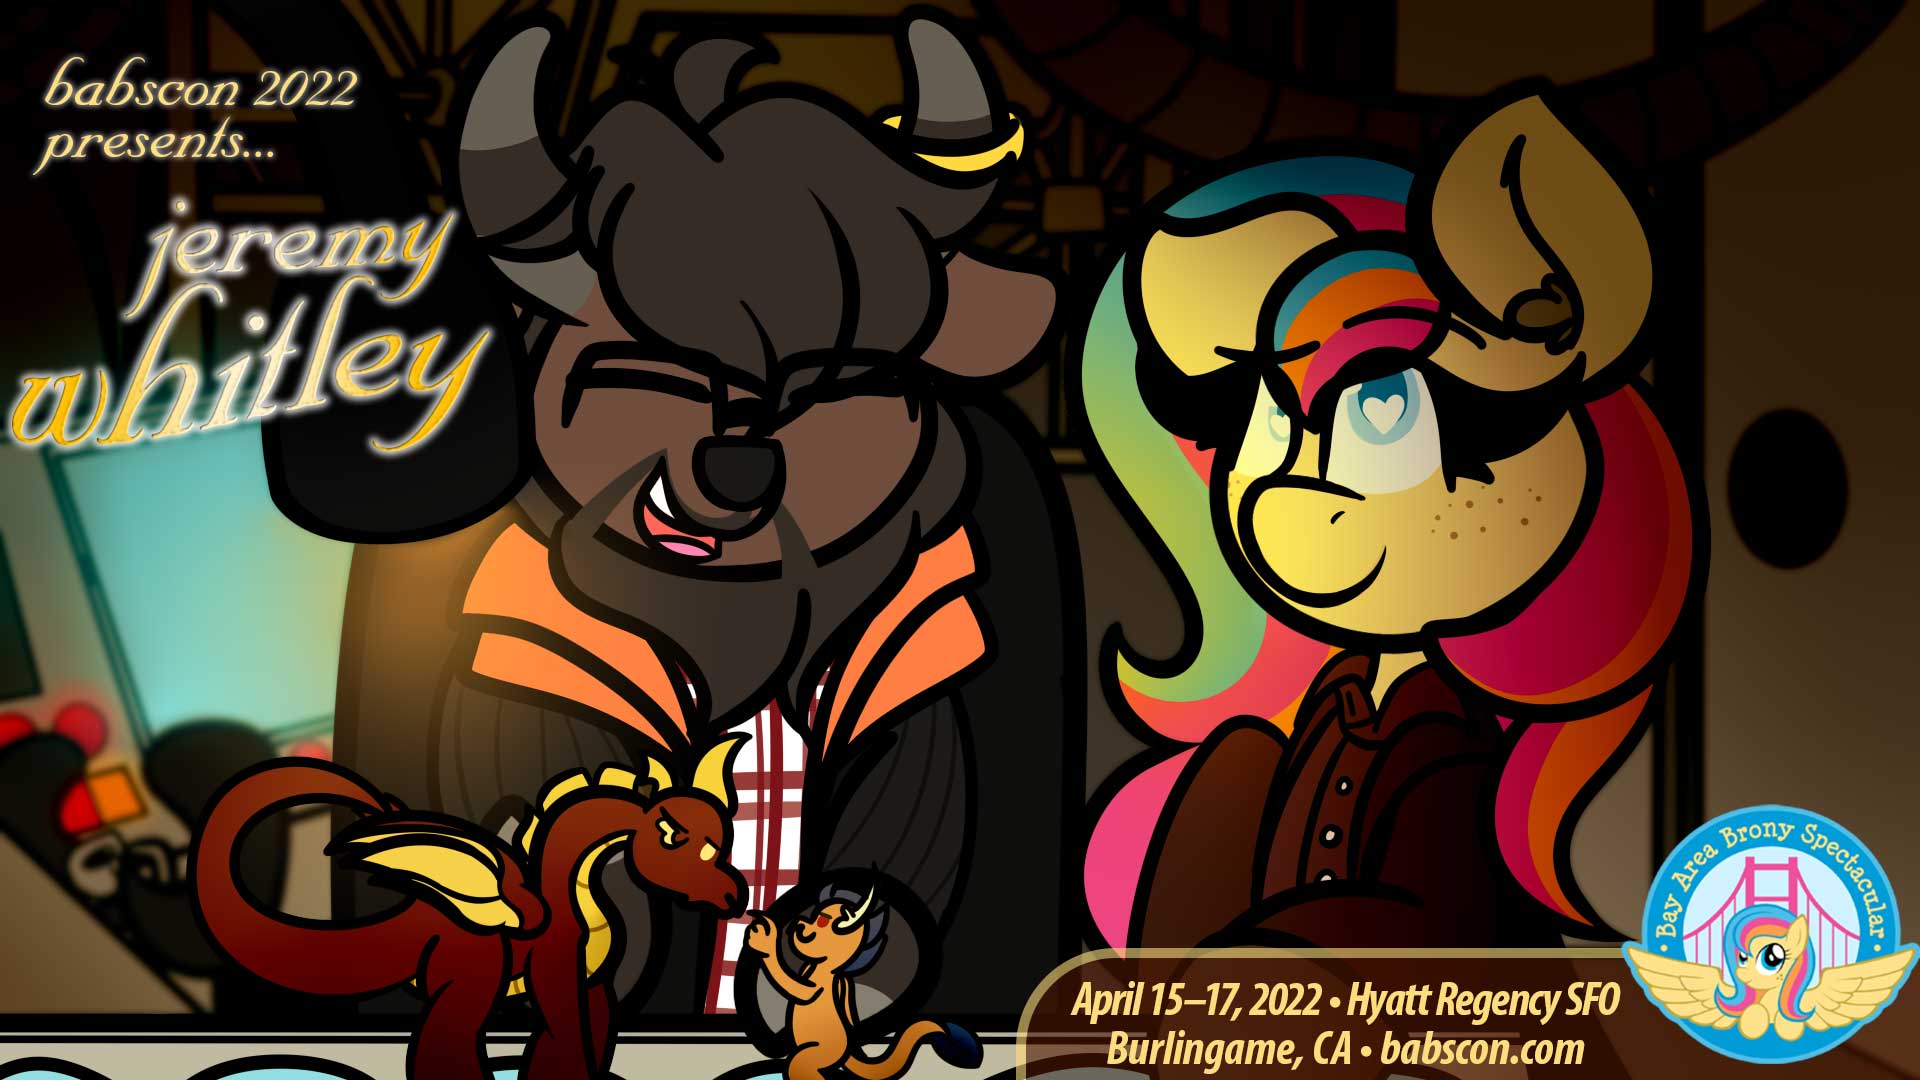 BABSCon 2022 Aims to Misbehave with Jeremy Whitley